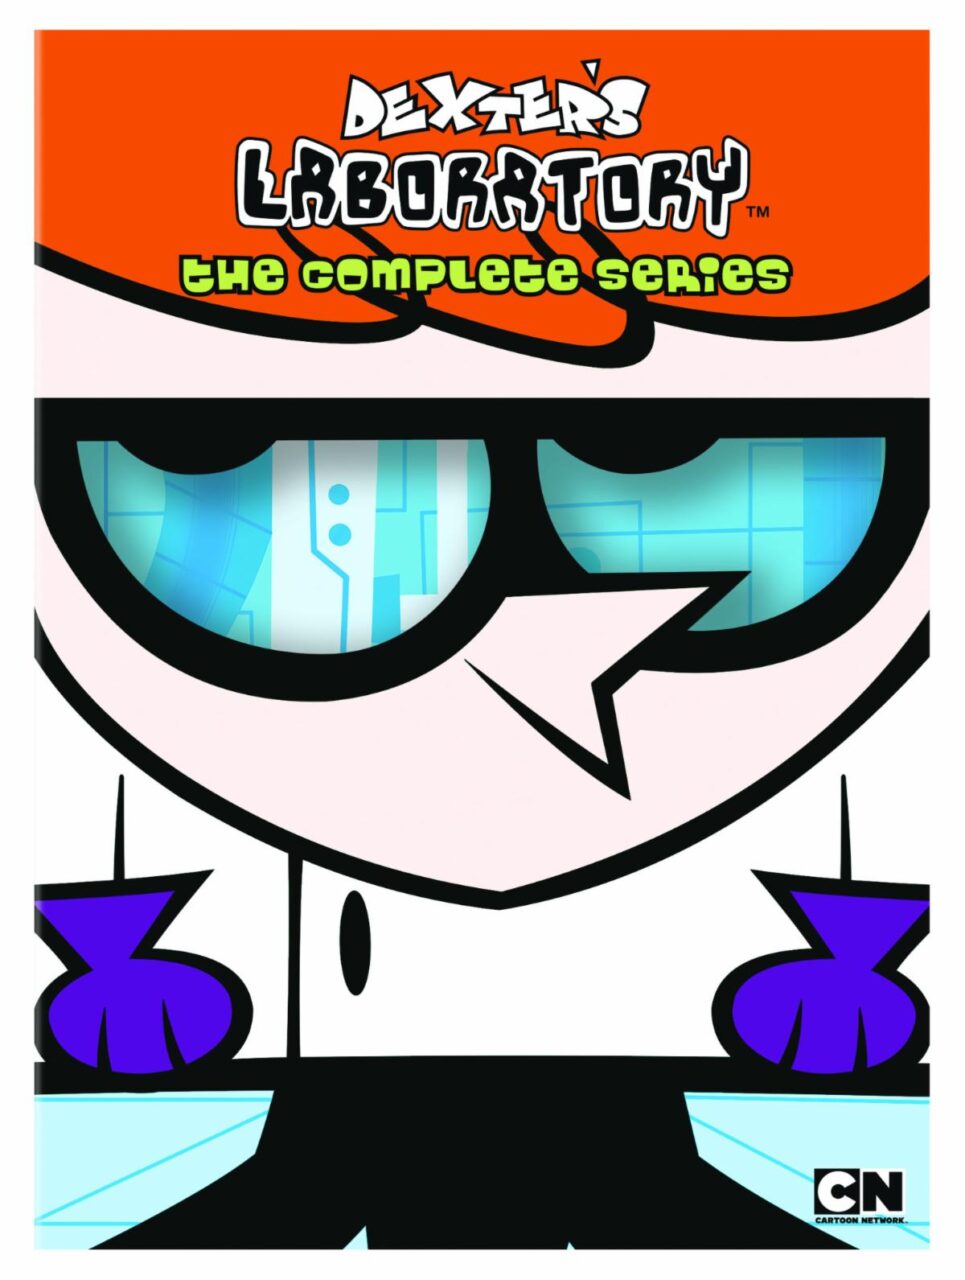 Dexter's Laboratory: The Complete Series DVD cover (Warner Bros. Discovery Home Entertainment)